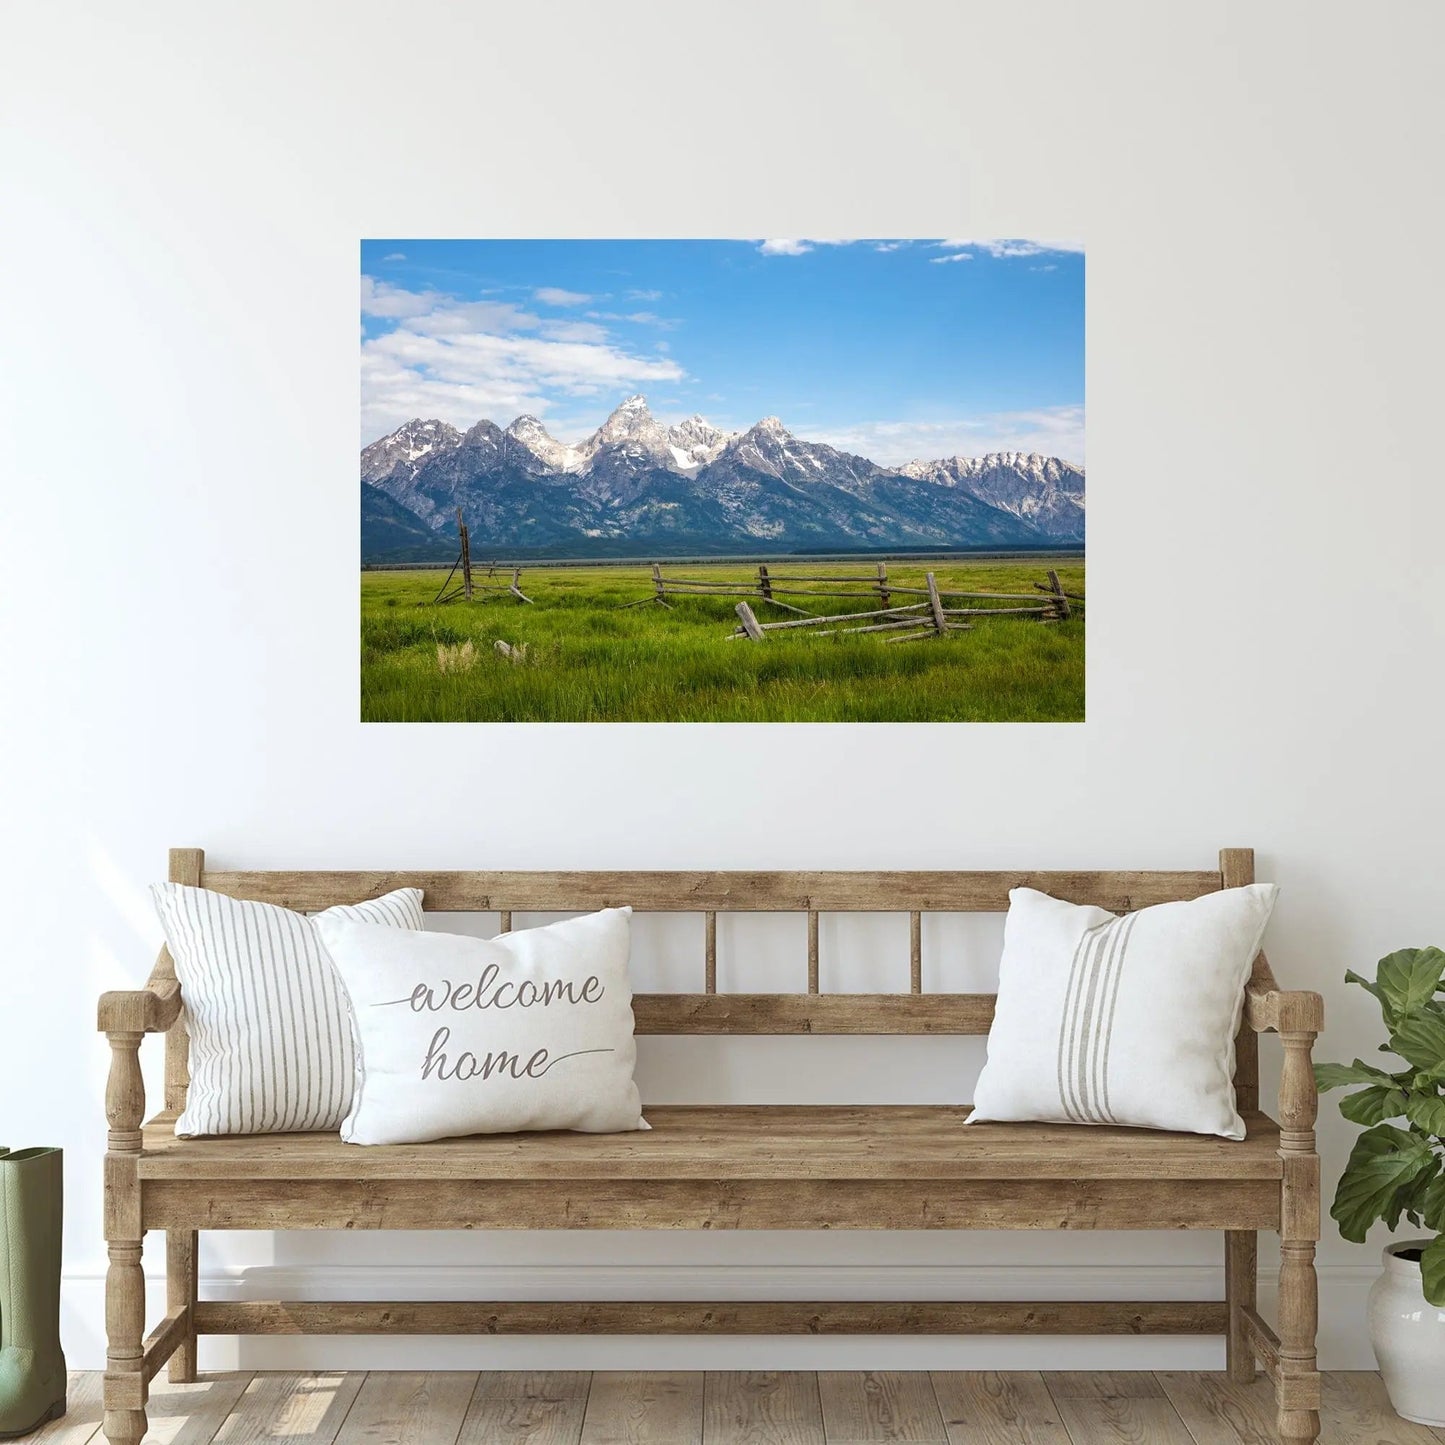 Picture of Grand Tetons with green pasture and wooden fence hanging above a farmhouse style bench